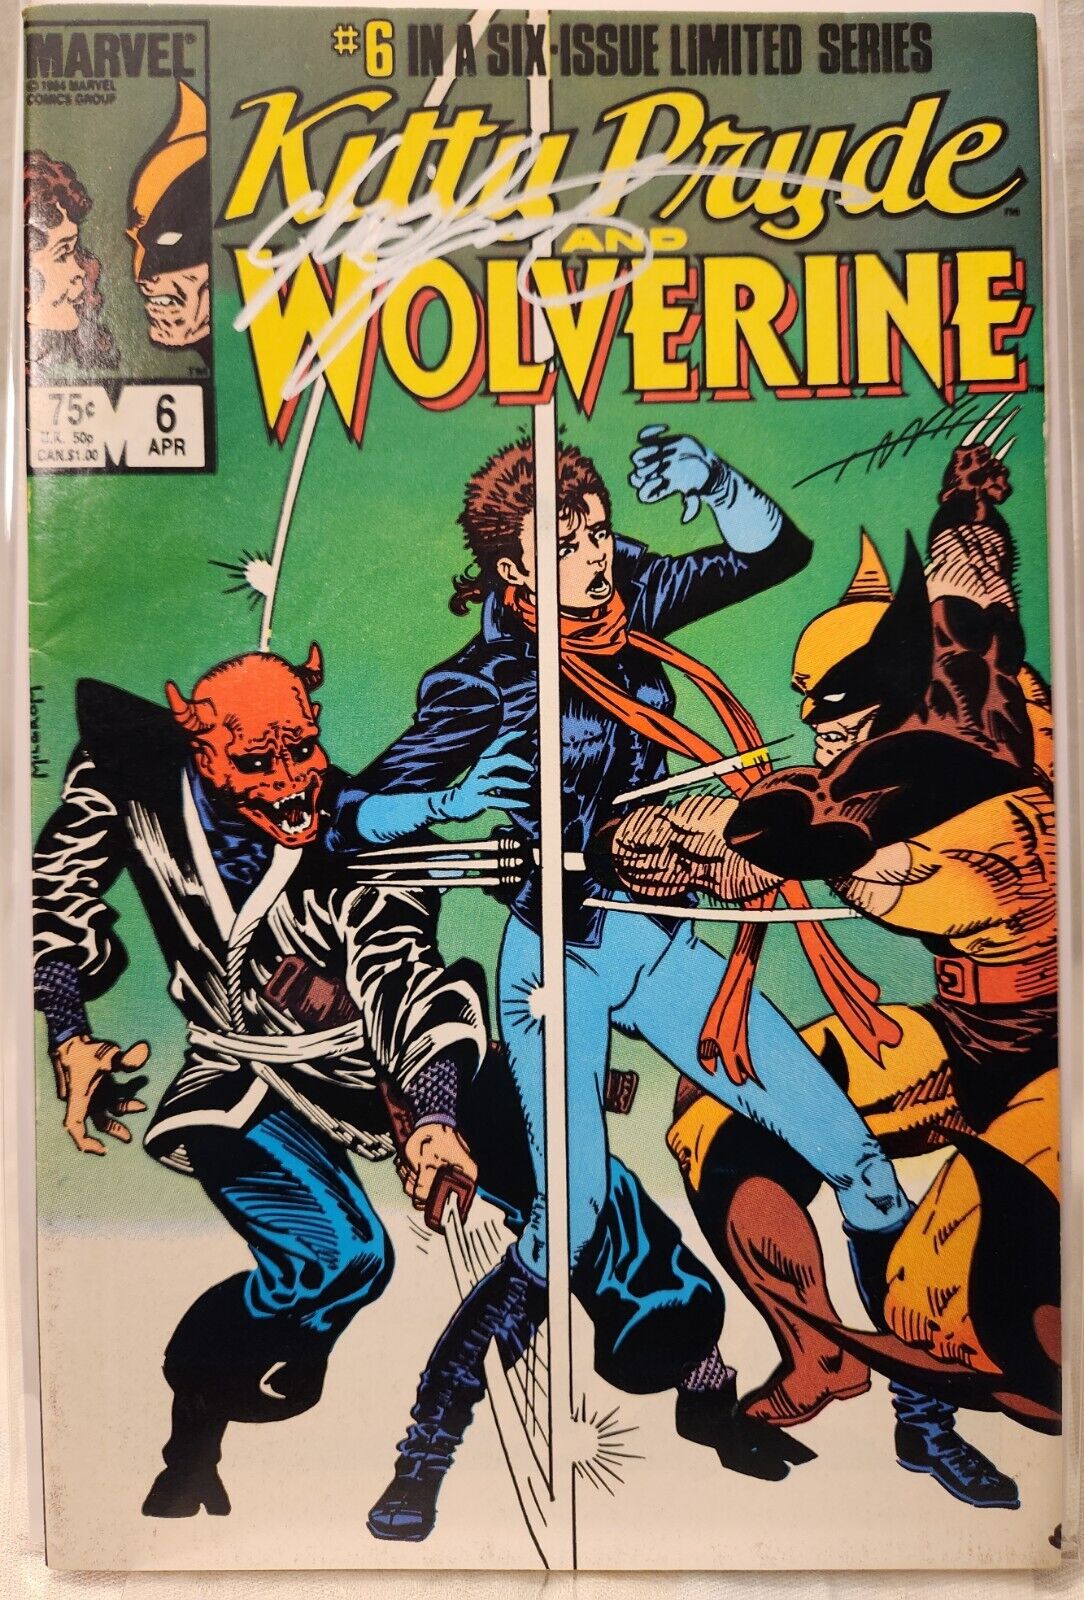 Kitty Pryde and Wolverine 6 of 6 Miniseries Autographed Chris Claremont Marvel